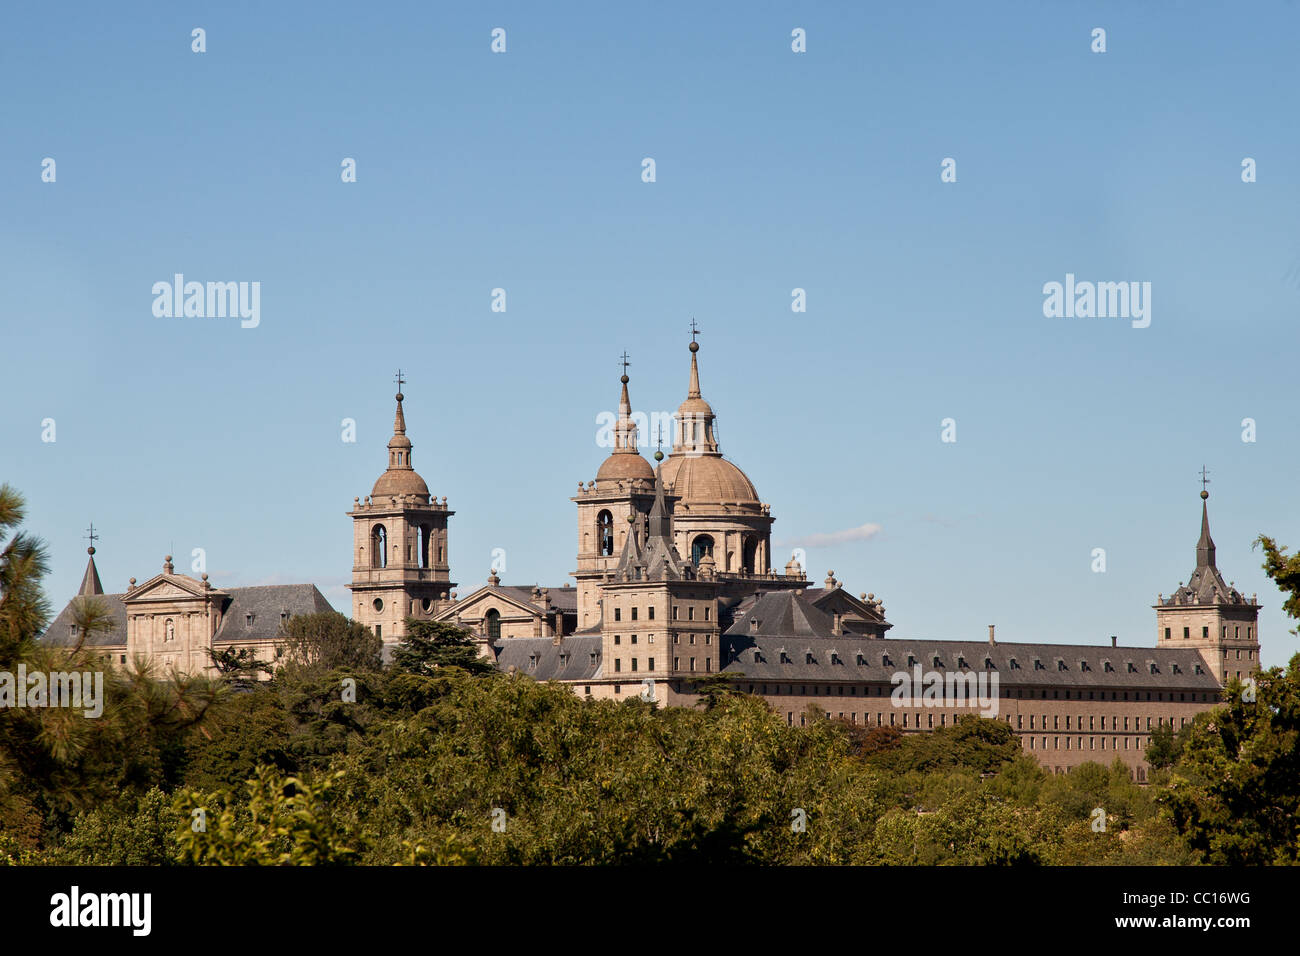 San Lorenzo de El Escorial Monastery from Casita del Infante. The towers of the church and monastery are set of by a blue sky Stock Photo